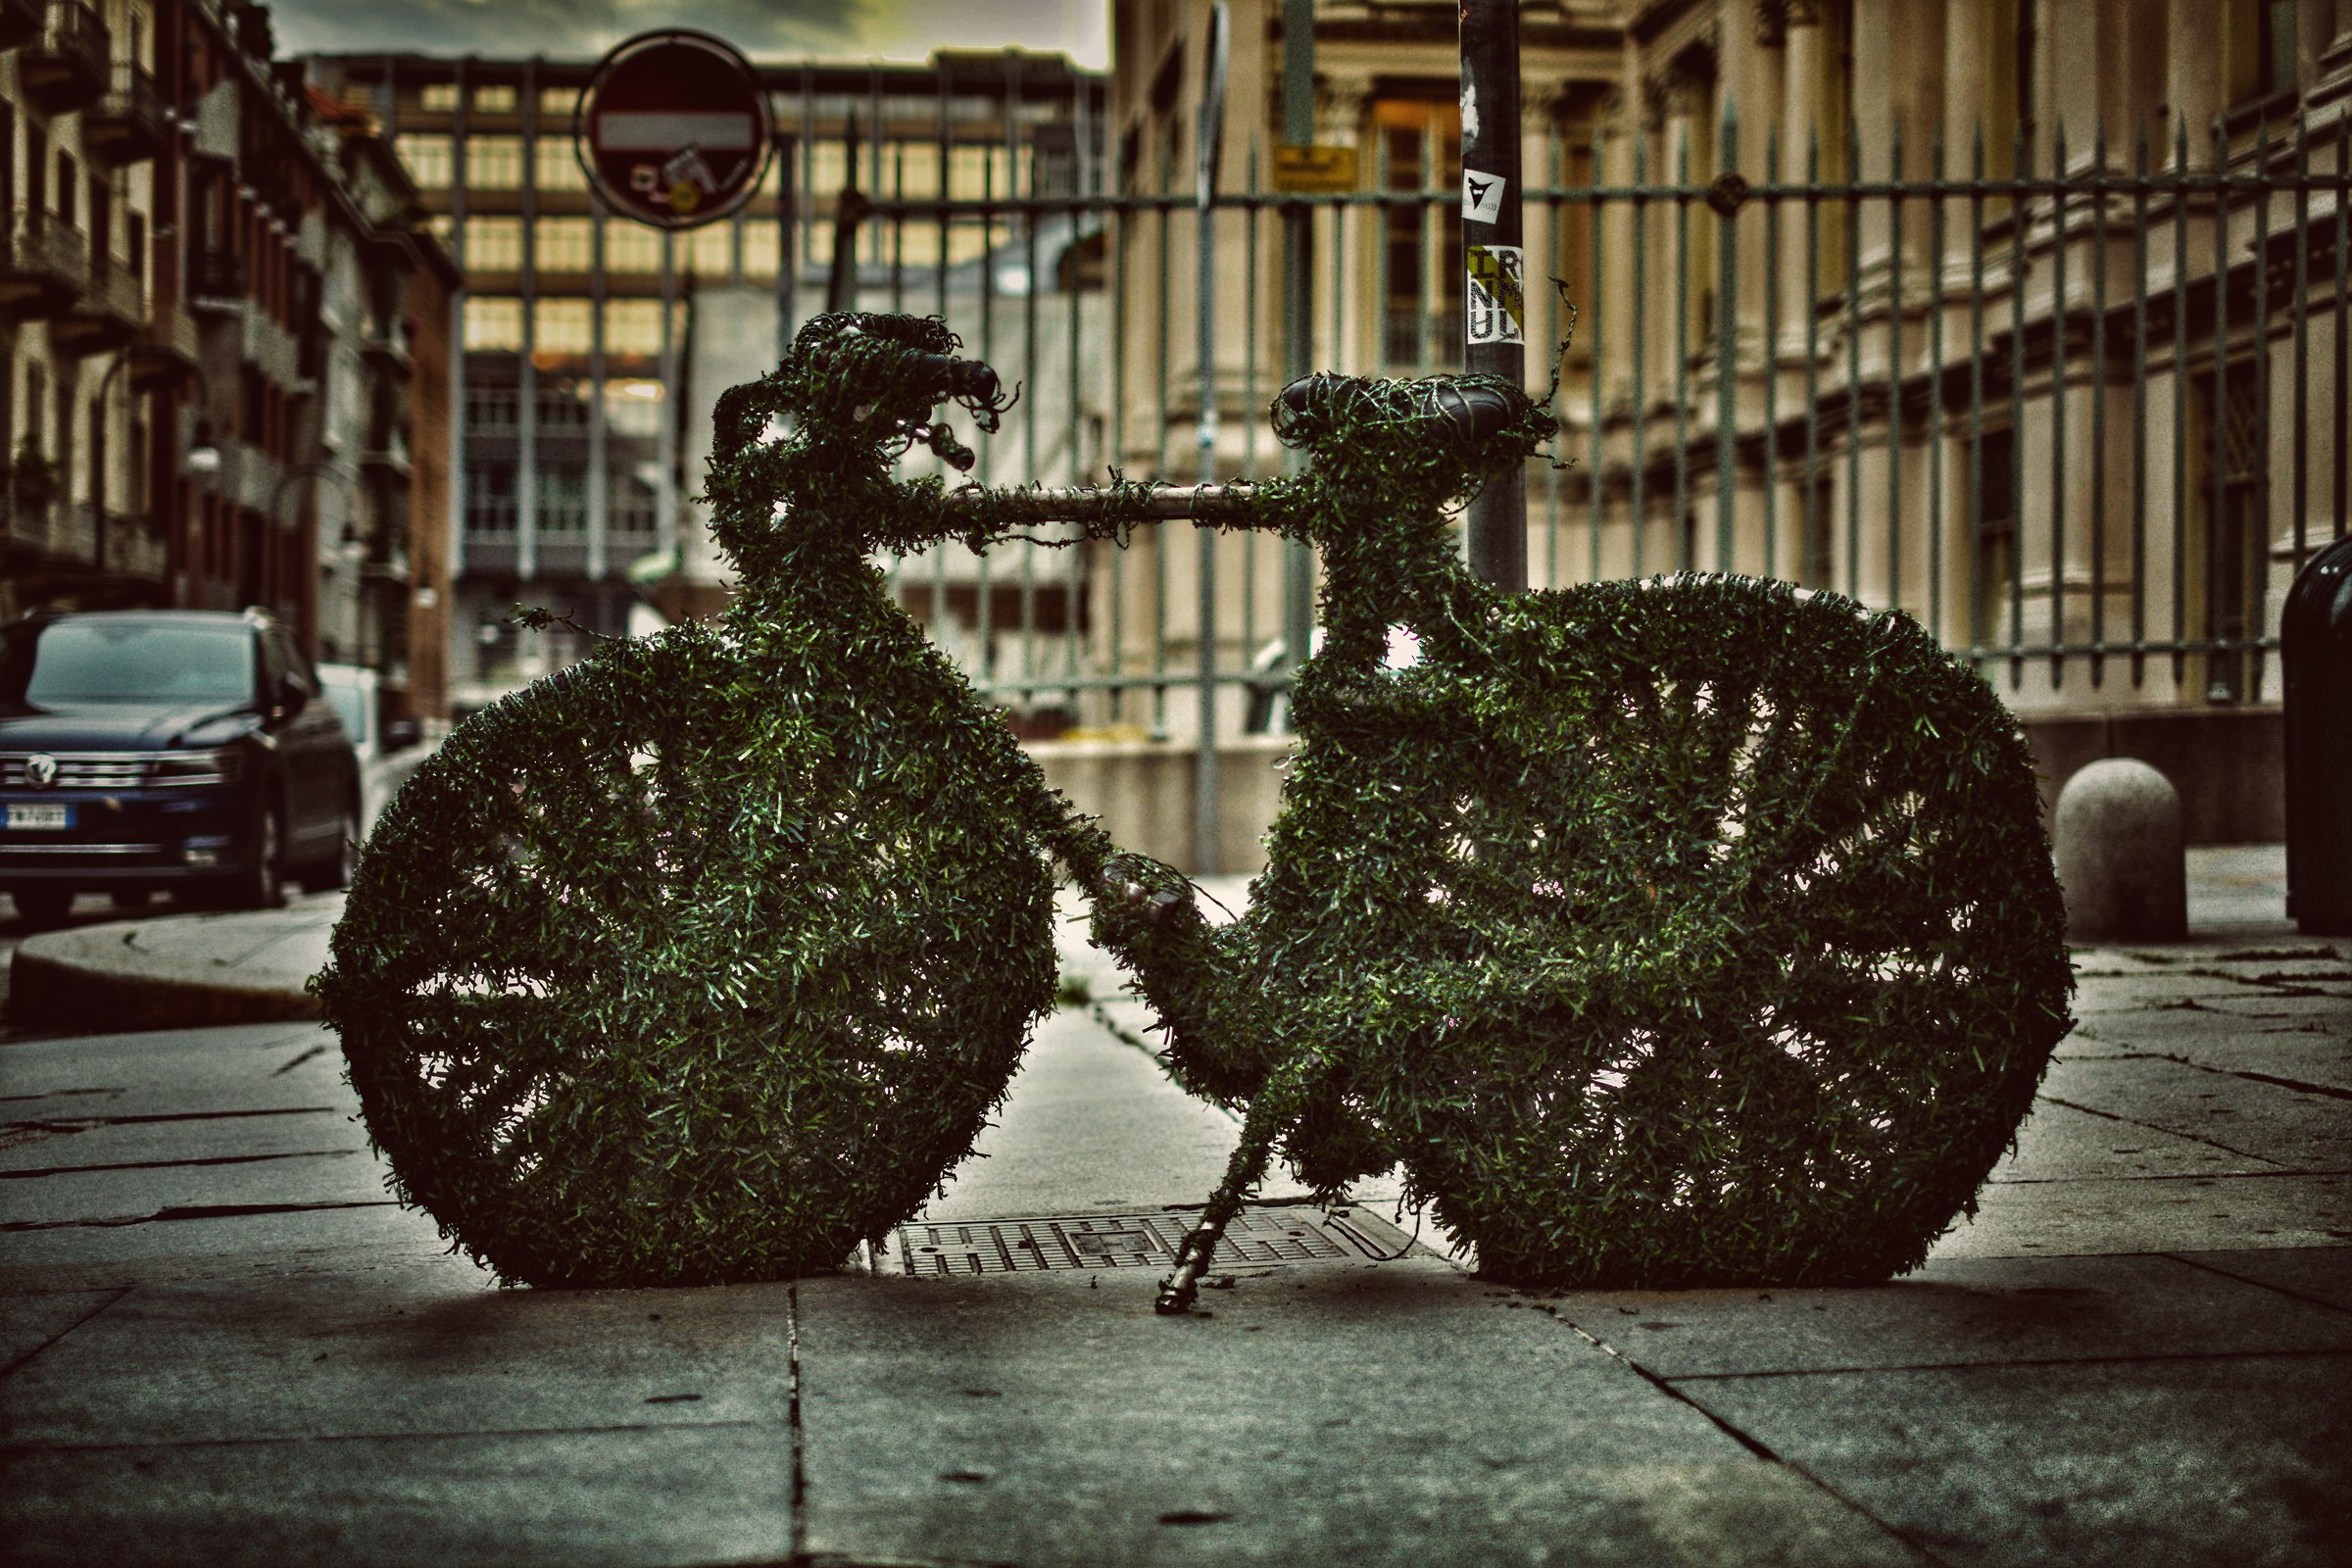 The Real ecological Bicycle...